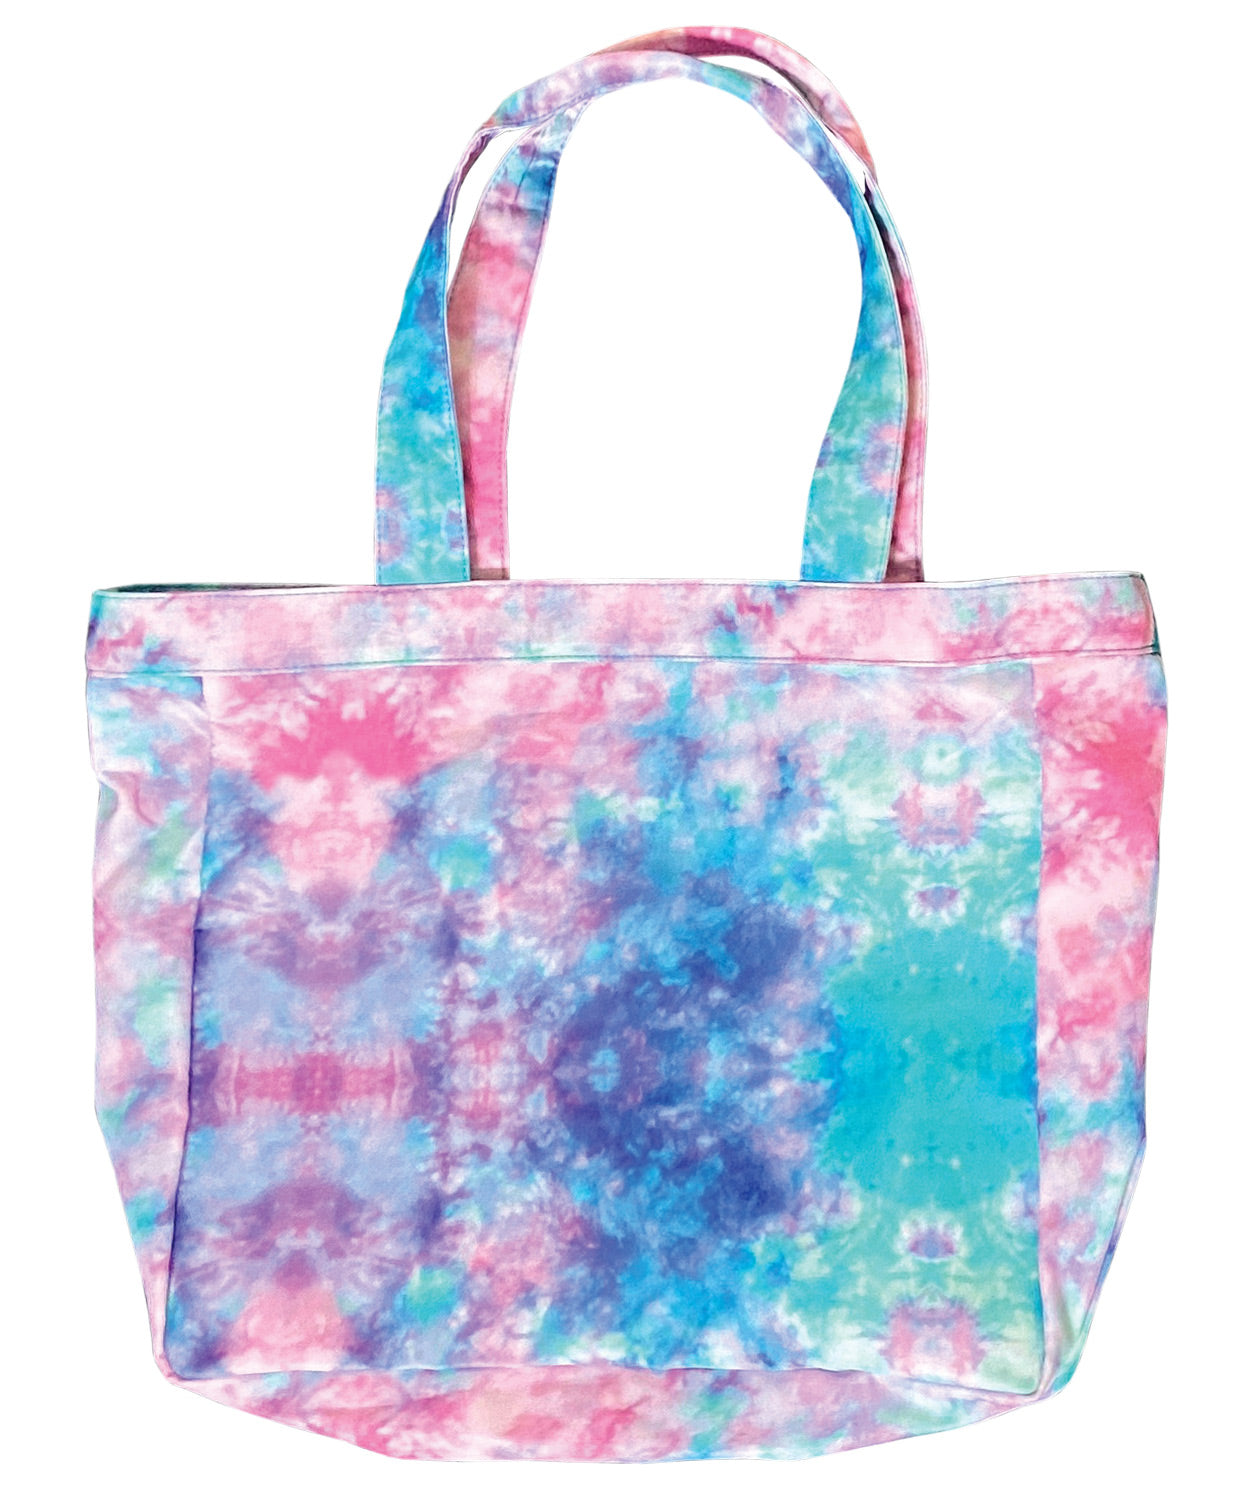 Extra Large Tote Bag by Prestige /  Tie Dye Cotton Candy Sky